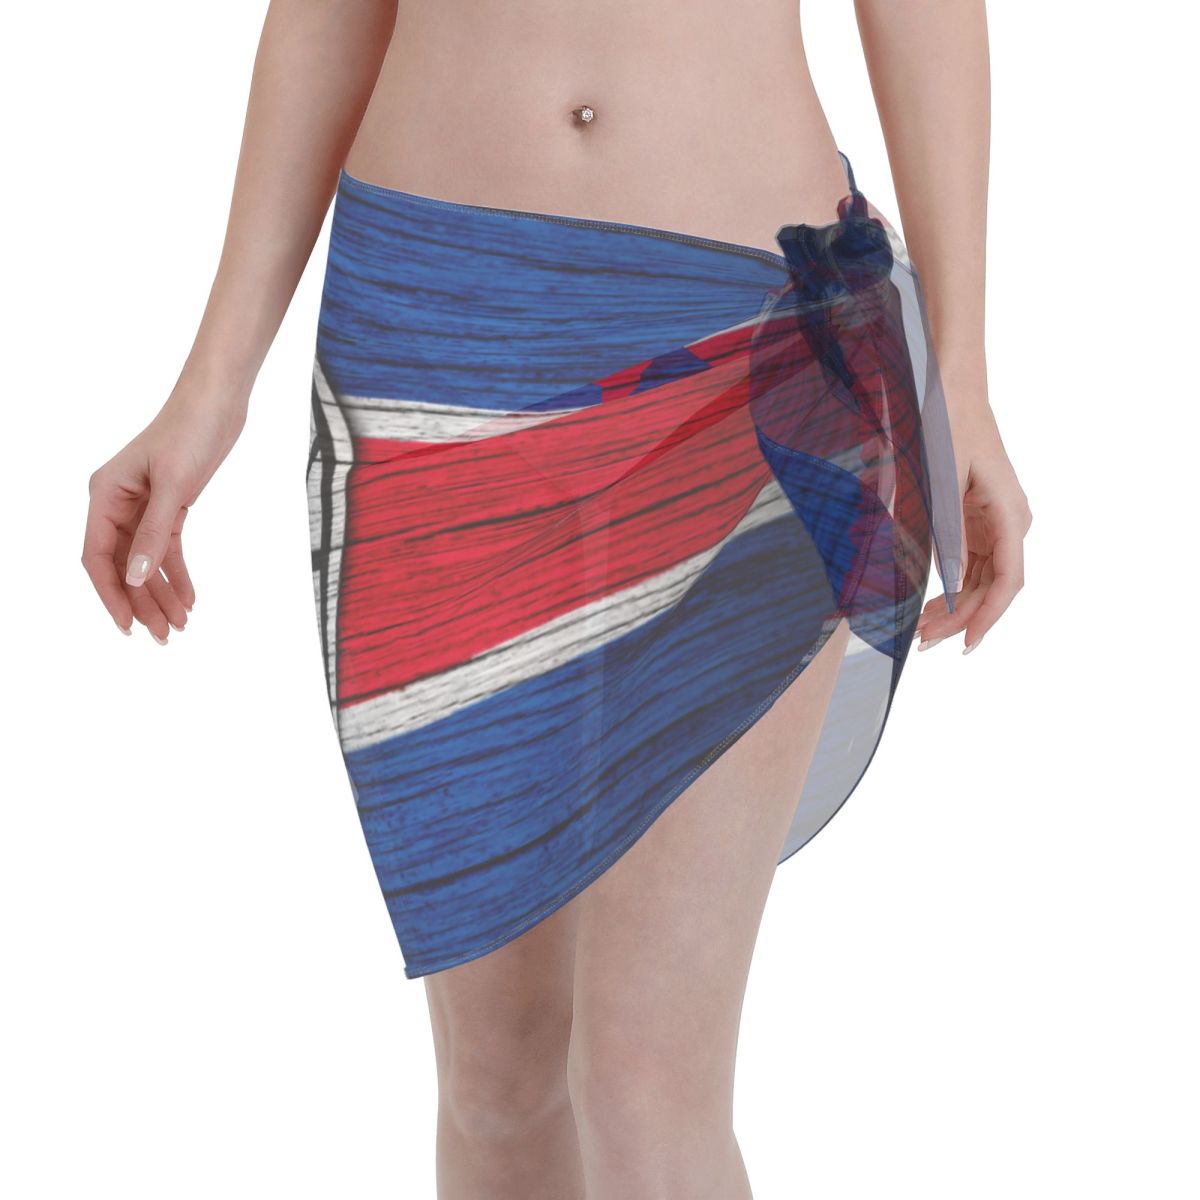 Los Angeles Clippers Hardwood Design Women's Short Beach Sarong Cover Ups